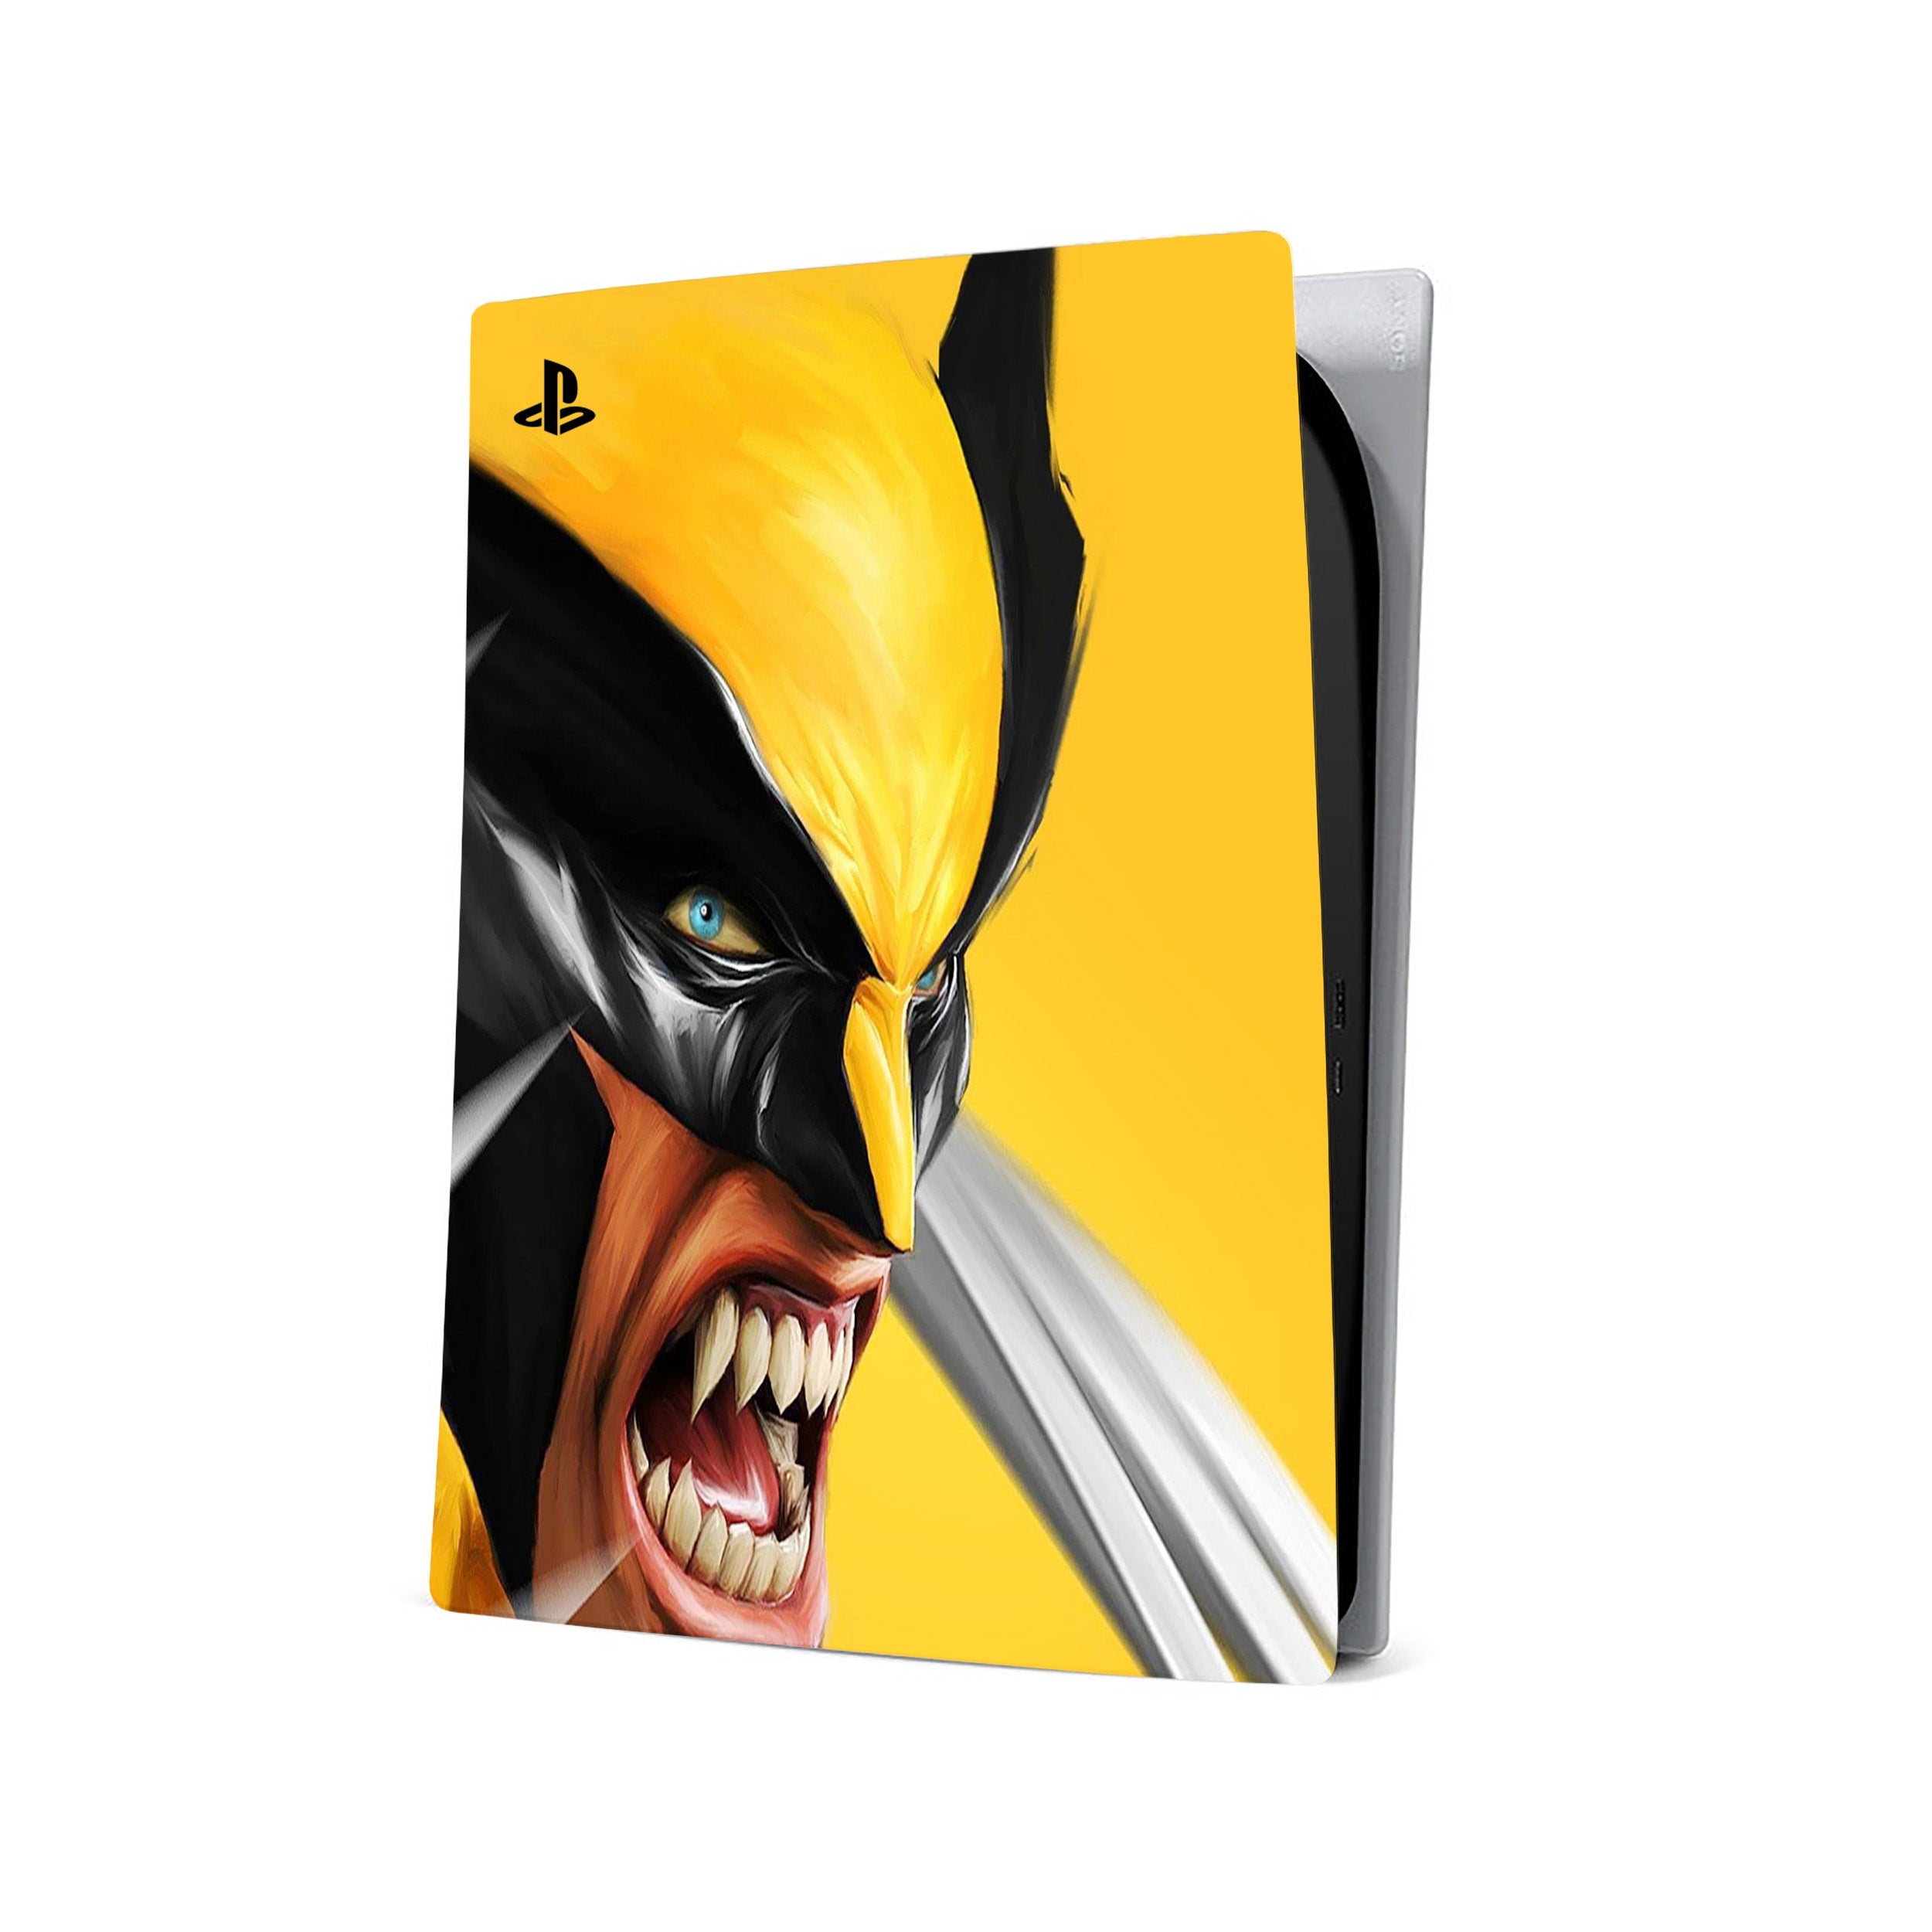 A video game skin featuring a Marvel X Men Wolverine design for the PS5.